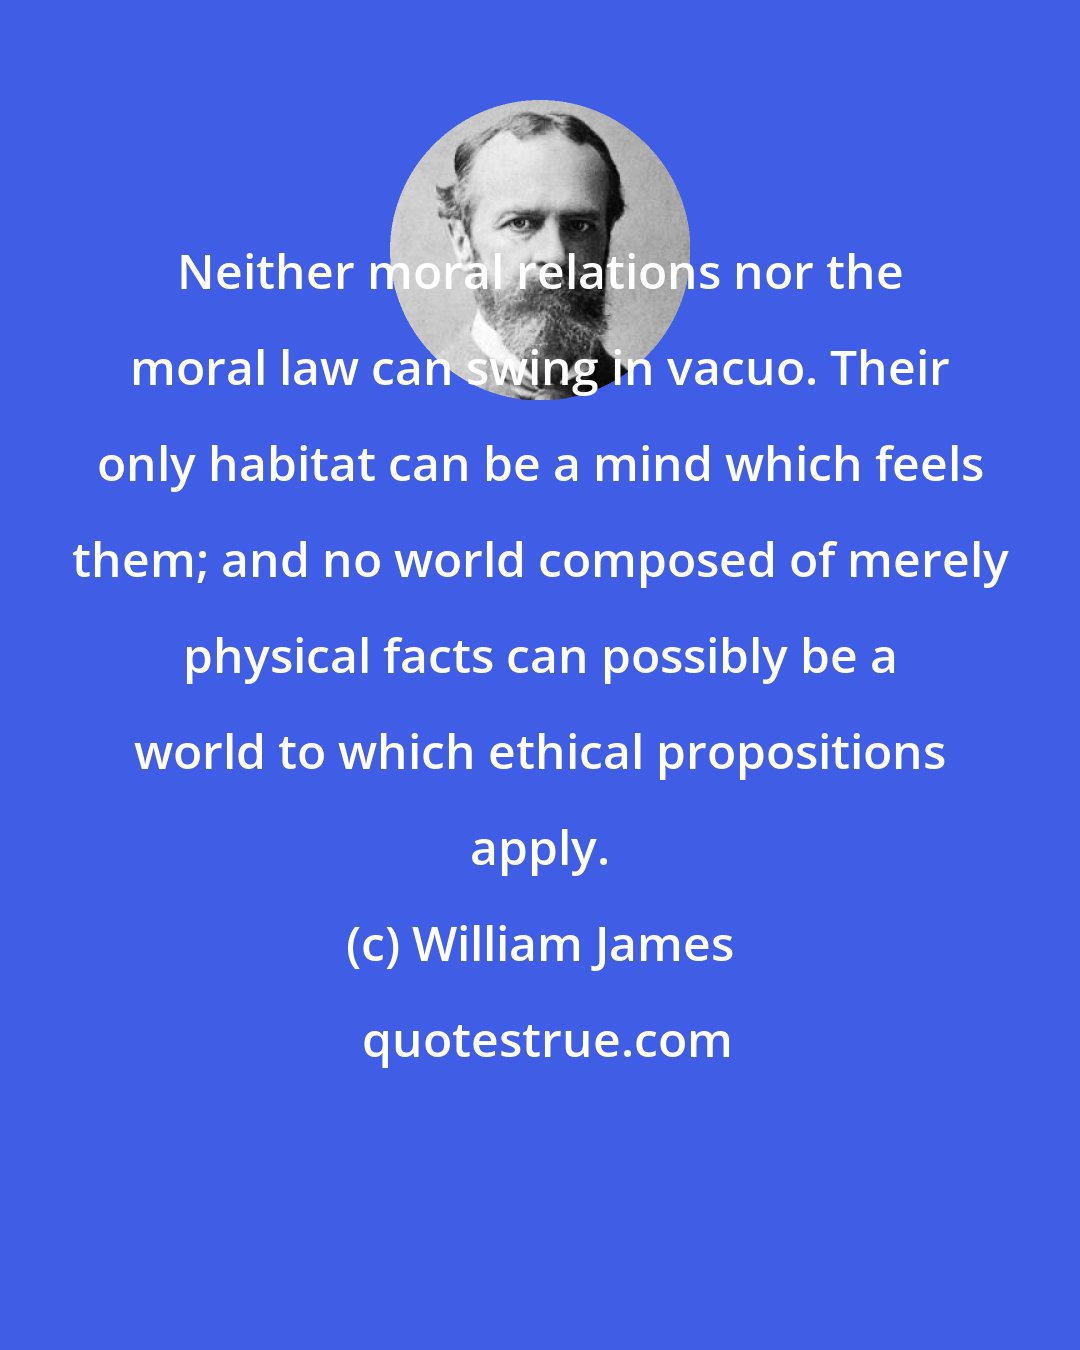 William James: Neither moral relations nor the moral law can swing in vacuo. Their only habitat can be a mind which feels them; and no world composed of merely physical facts can possibly be a world to which ethical propositions apply.